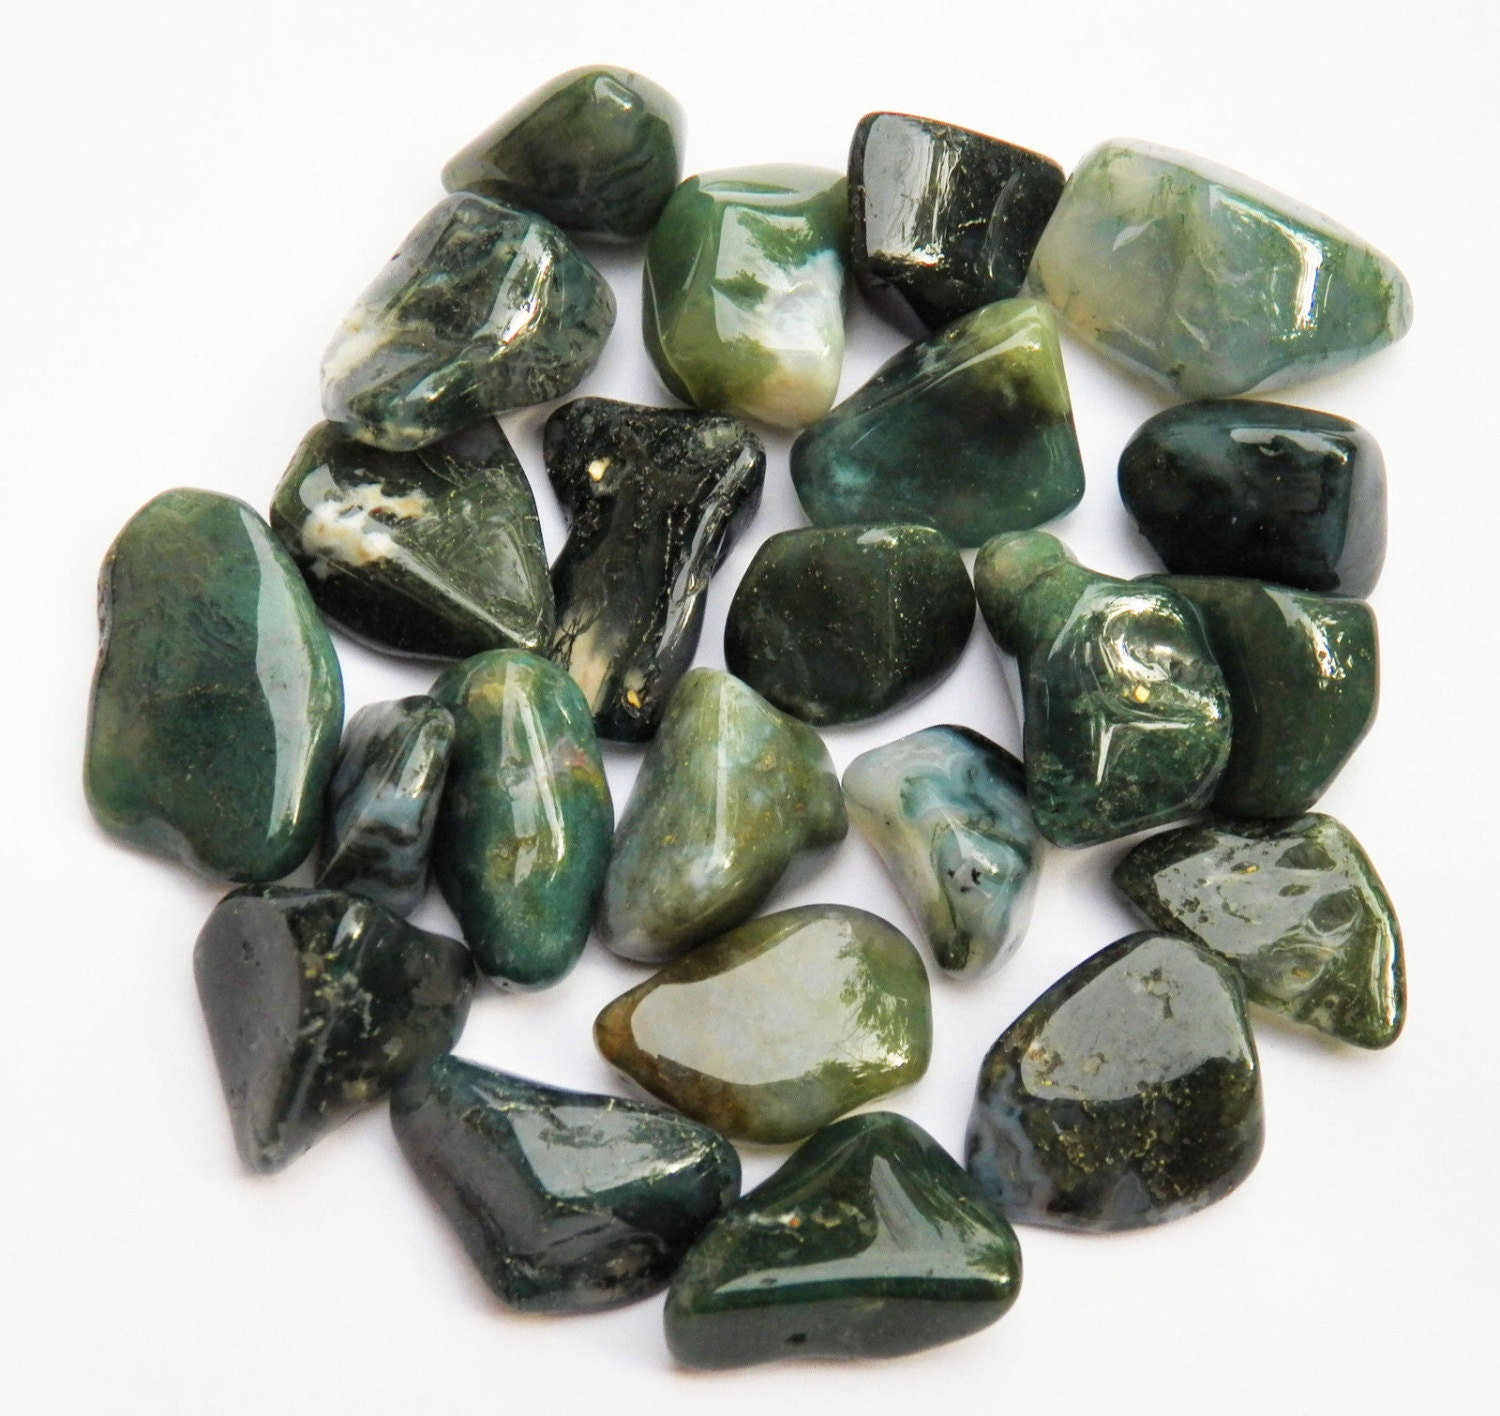 1 One MOSS AGATE Tumbled Crystal Healing Stone 1.0 to